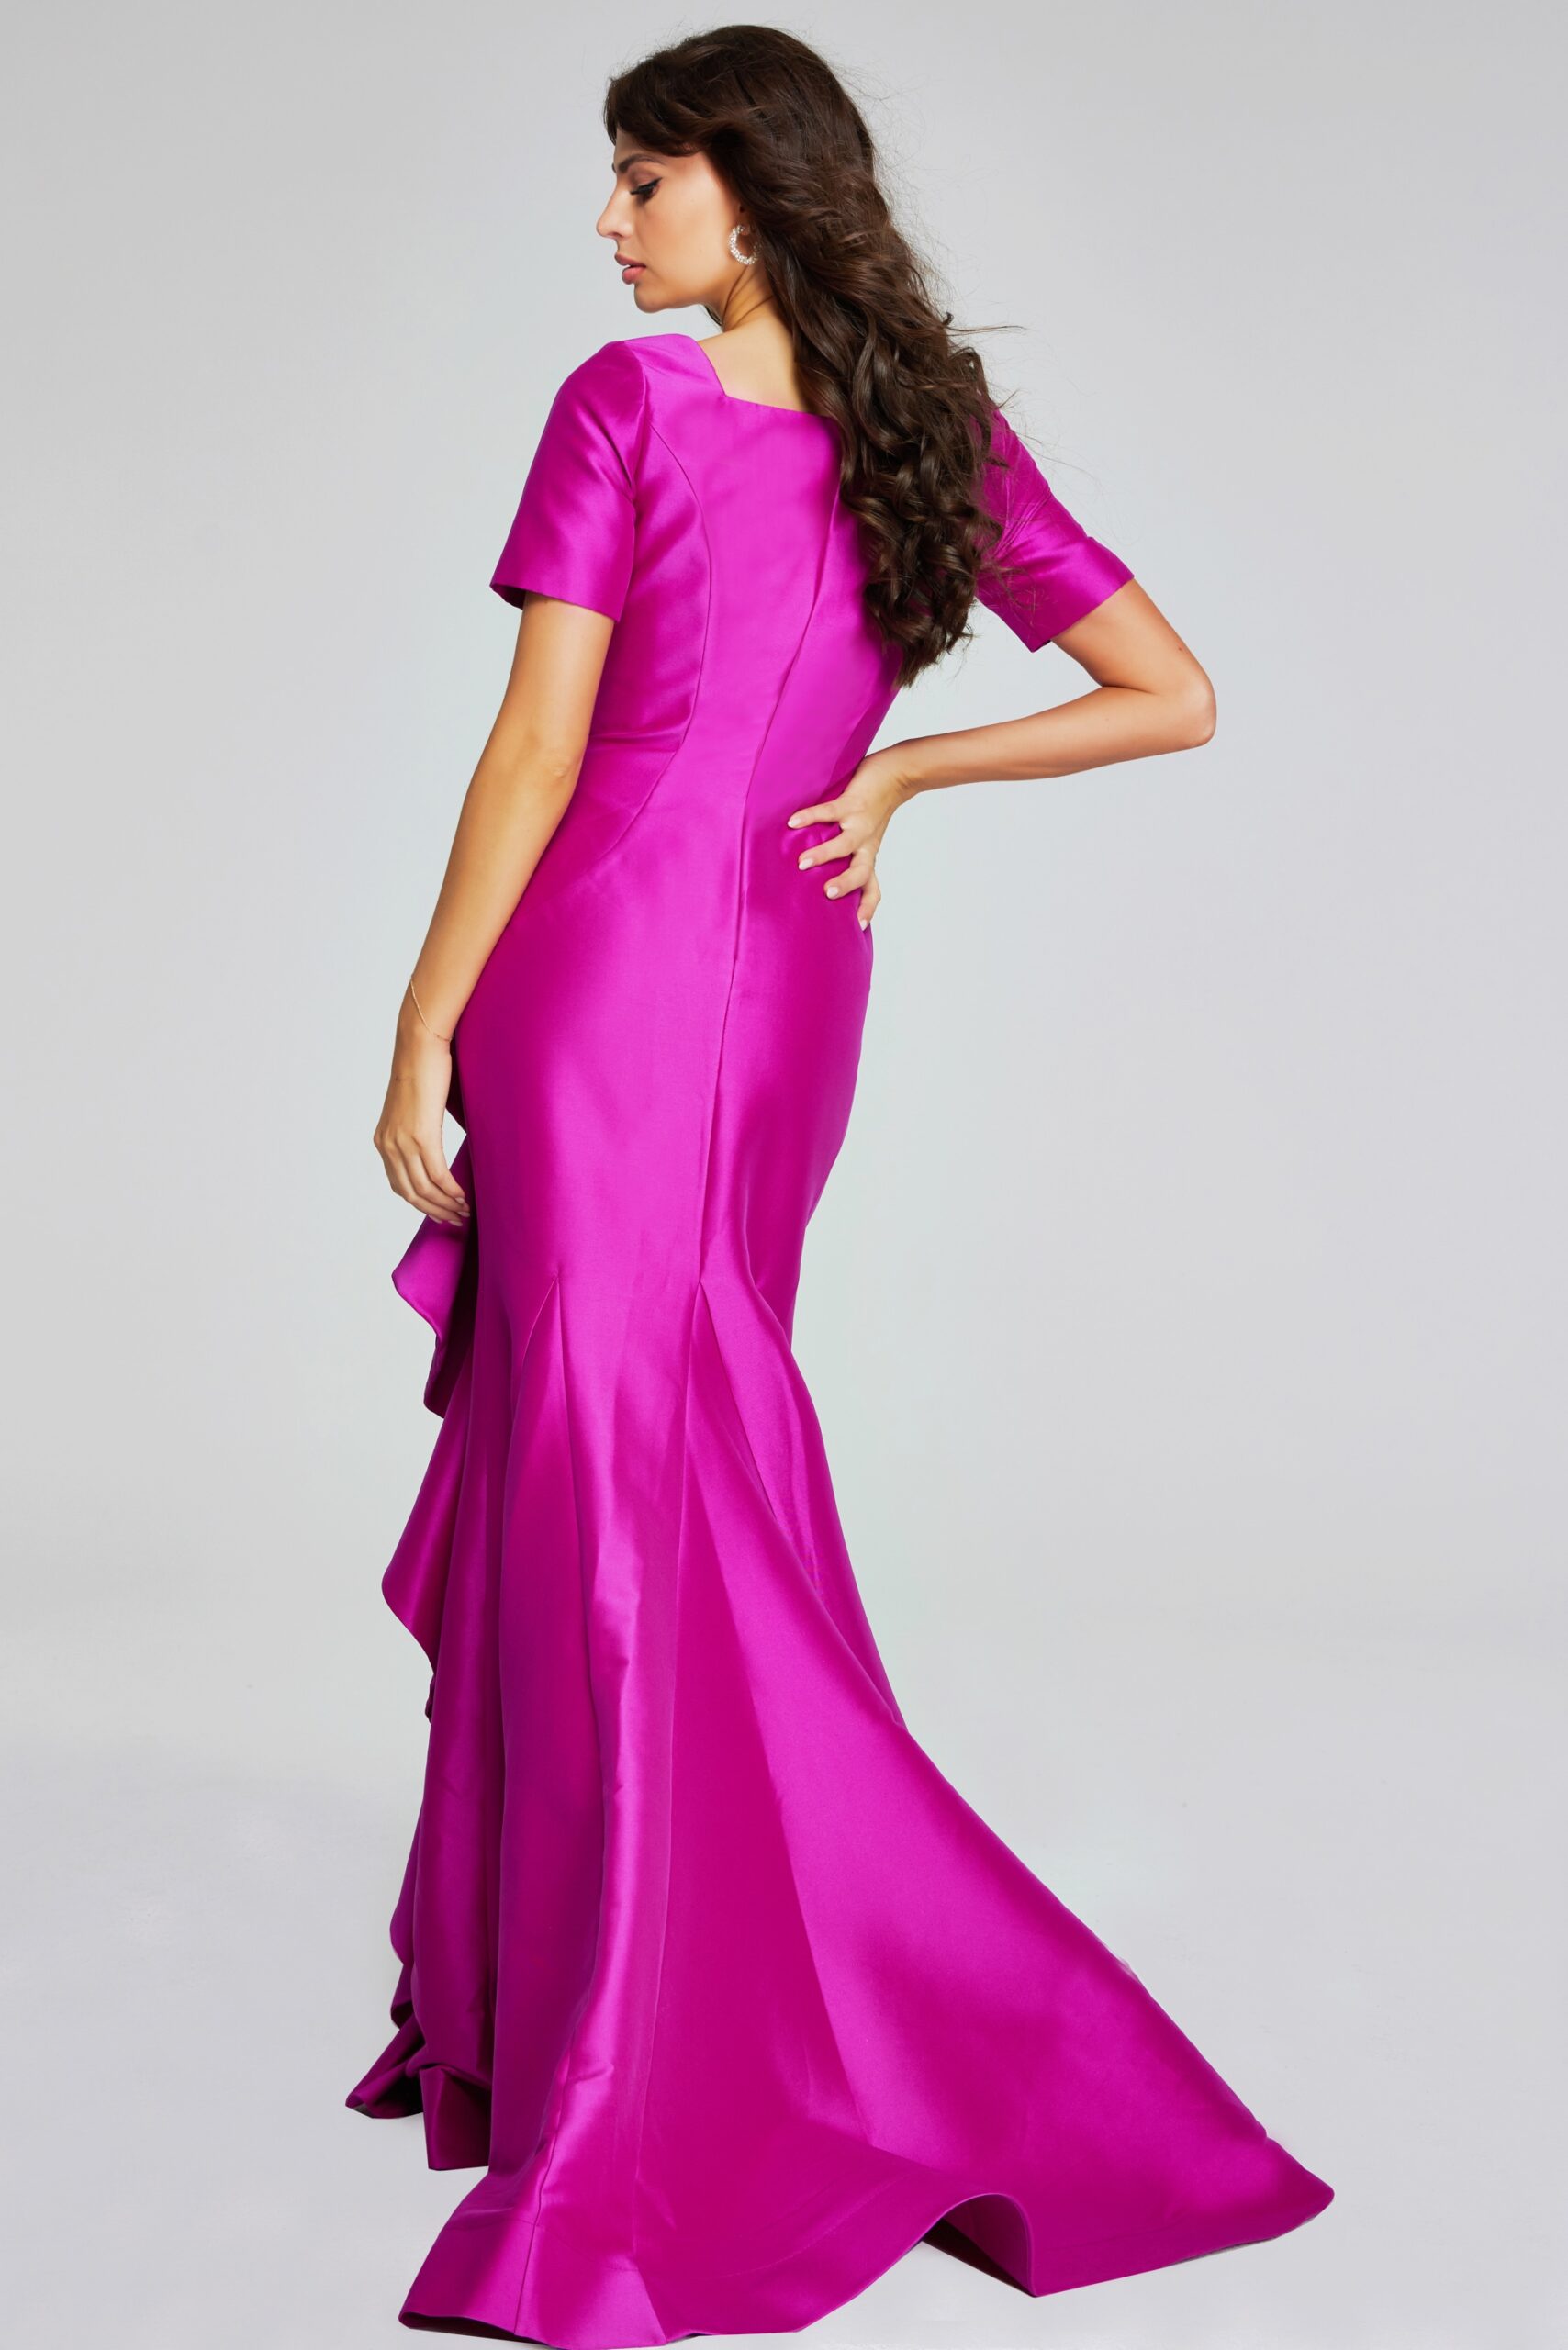 Vibrant Orchid Gown with Square Neckline and Ruffle Detail 41128